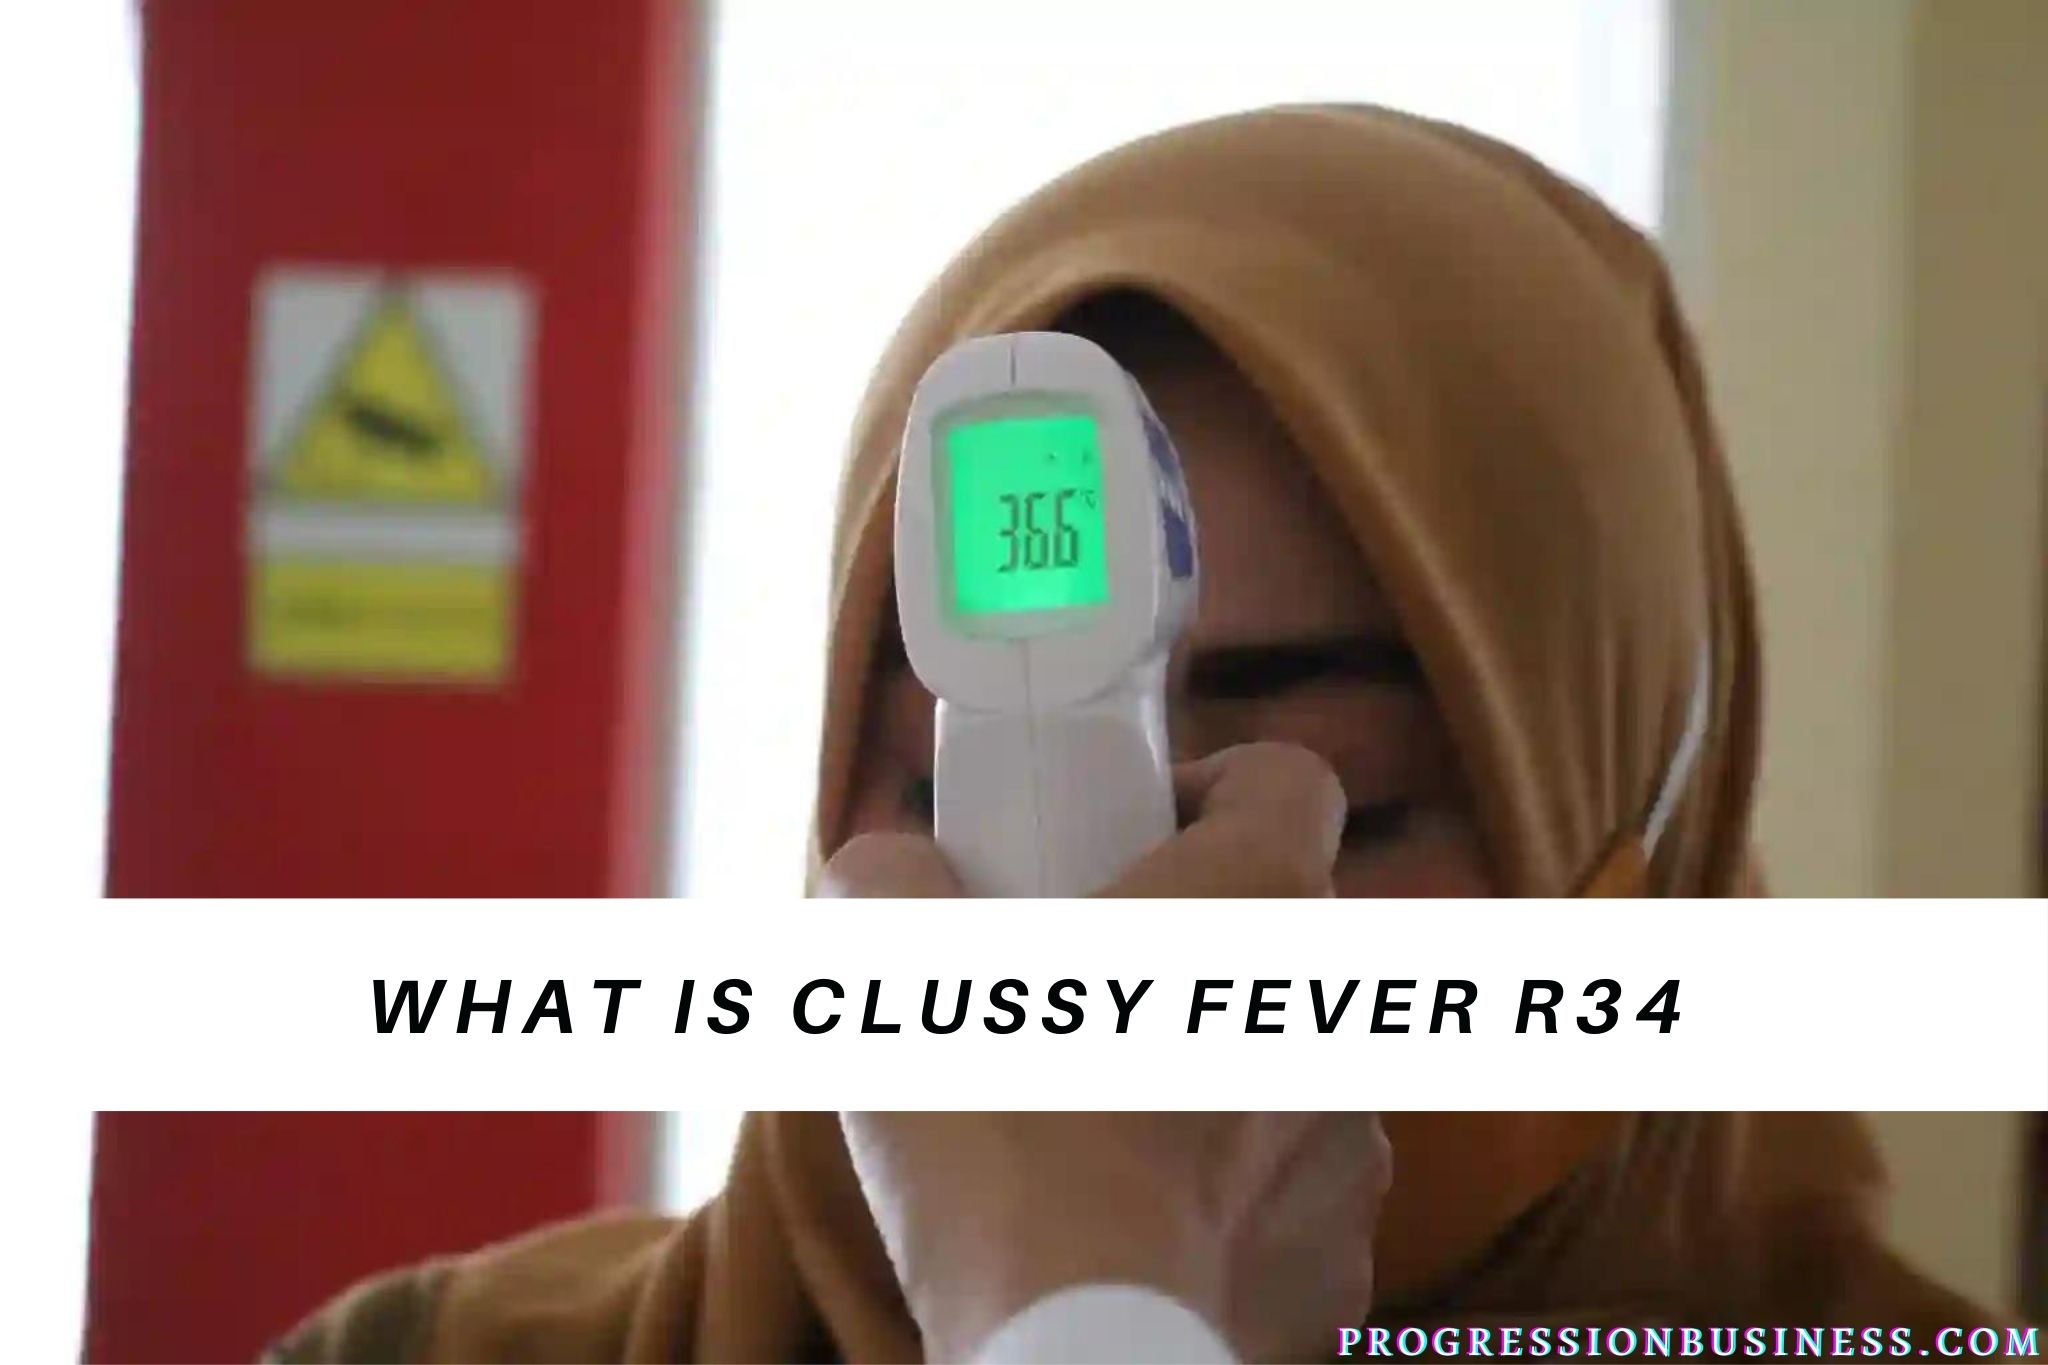 What Is Clussy Fever R34? Why Should I Worry About It?